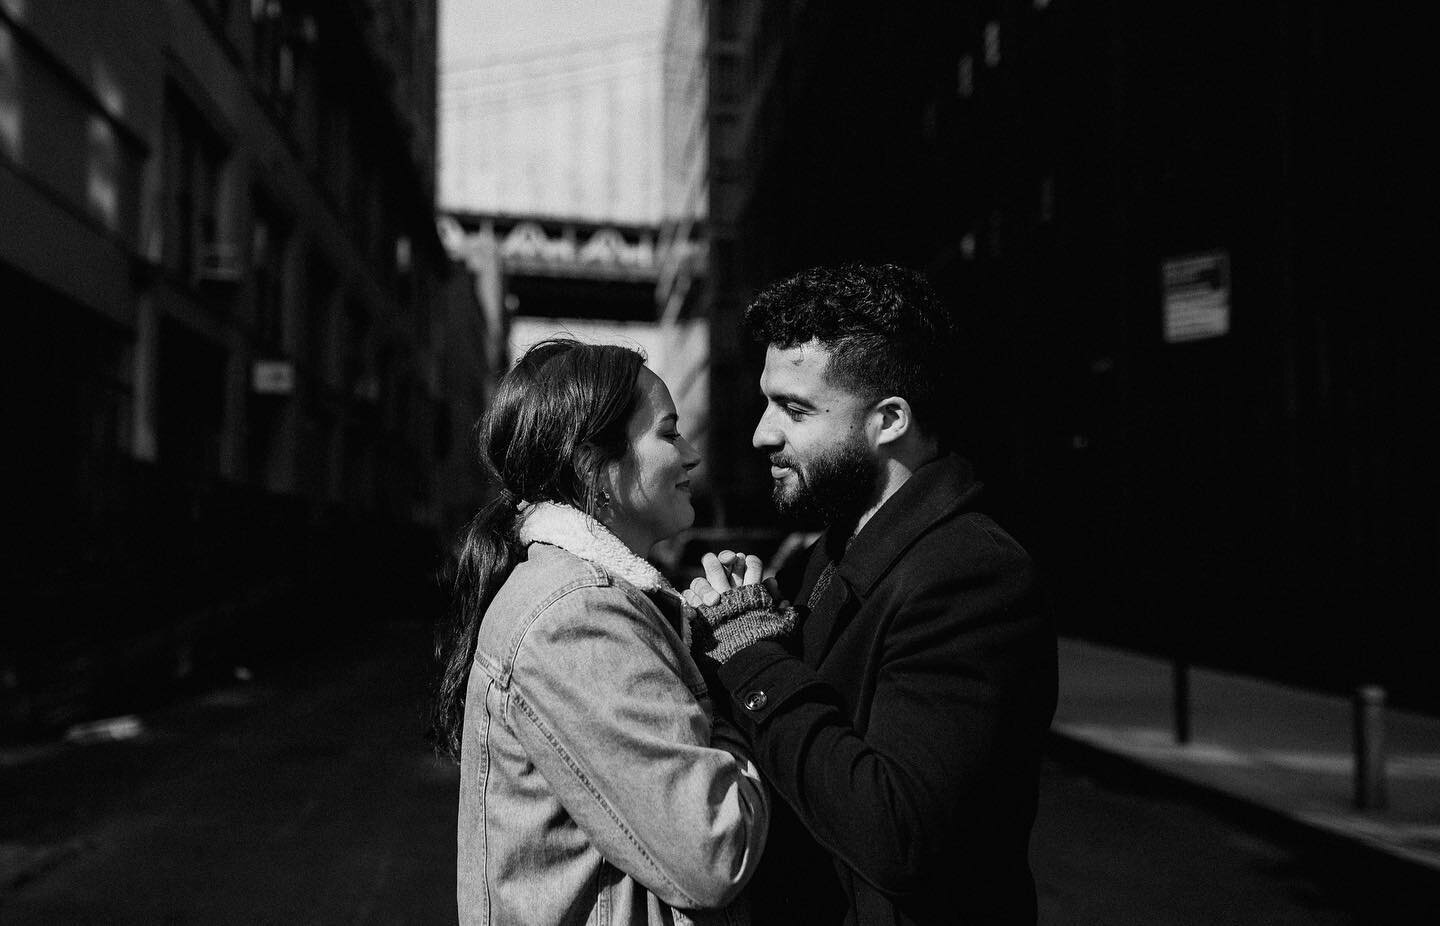 throwback to one of my favorite shoots in Brooklyn with Emily + Camilo.🖤
.
.
.
.
#nycphotographer #newyorkphotographer #newyorkphotography #newyorkweddingphotographer #nycweddingphotographer #brooklynweddingphotographer #nycengagementphotographer #n